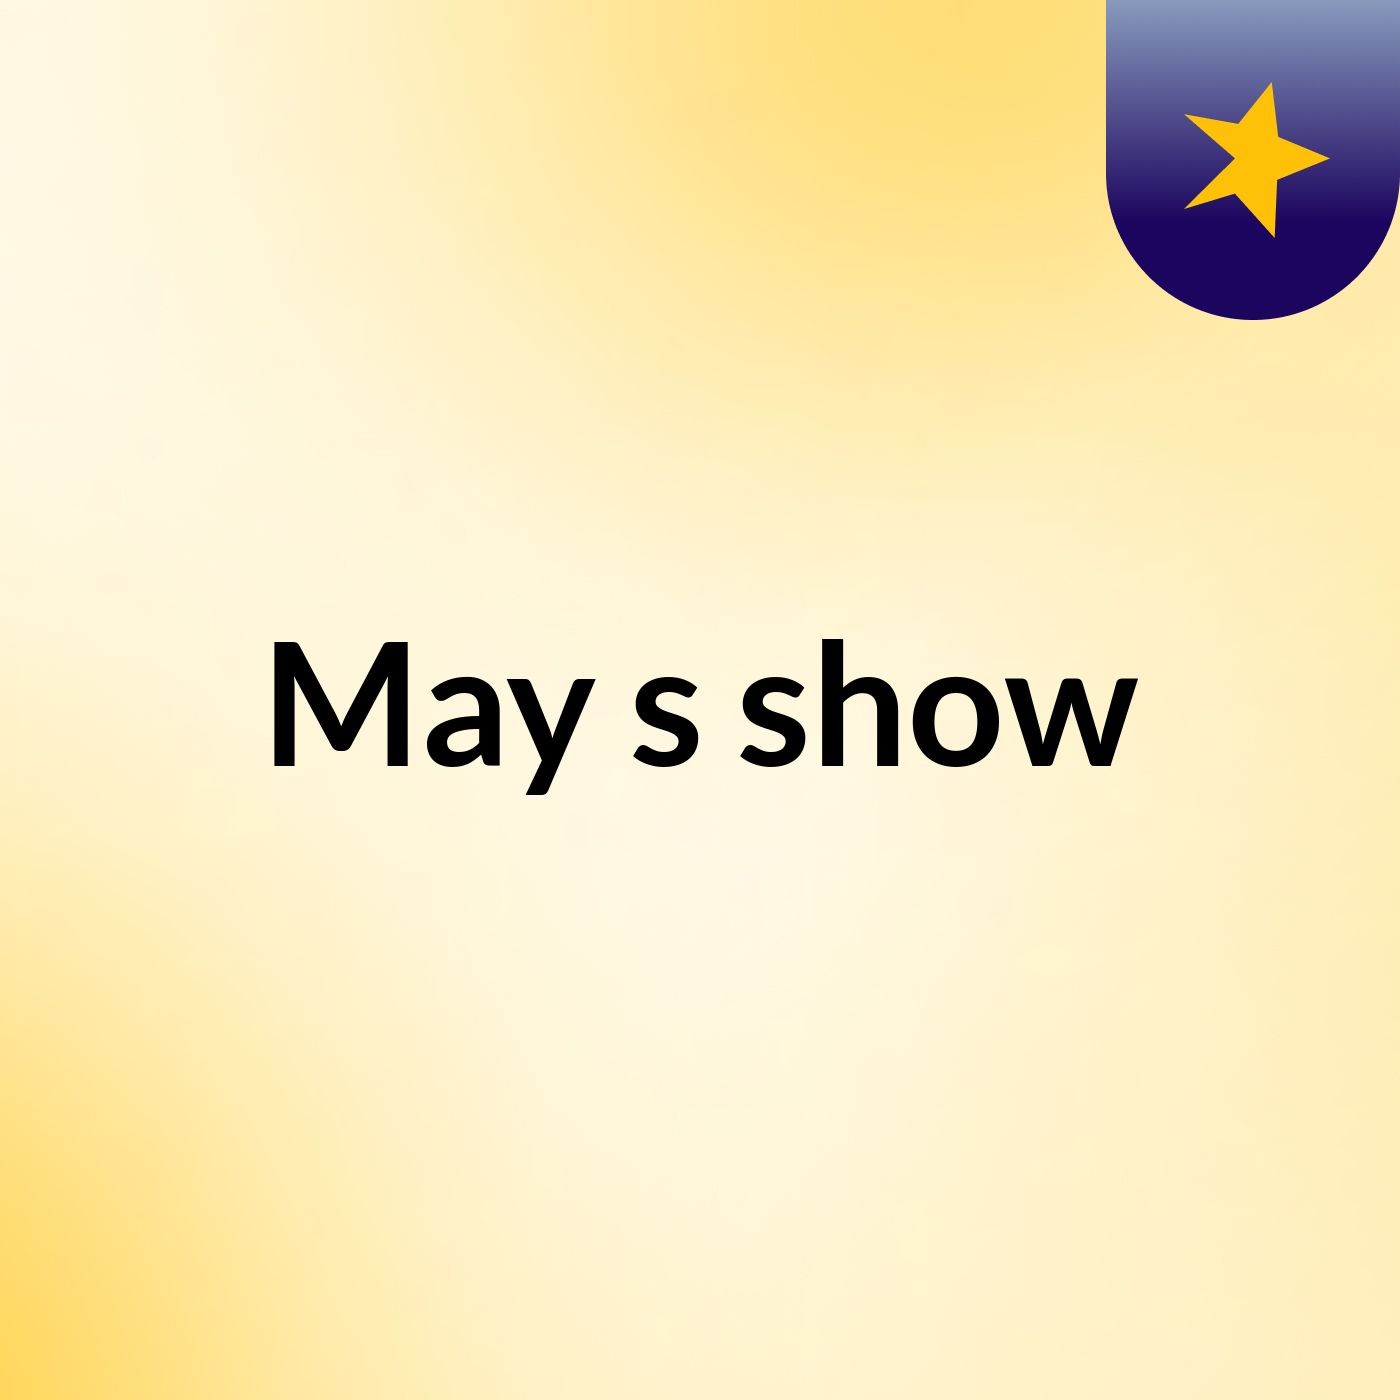 May's show